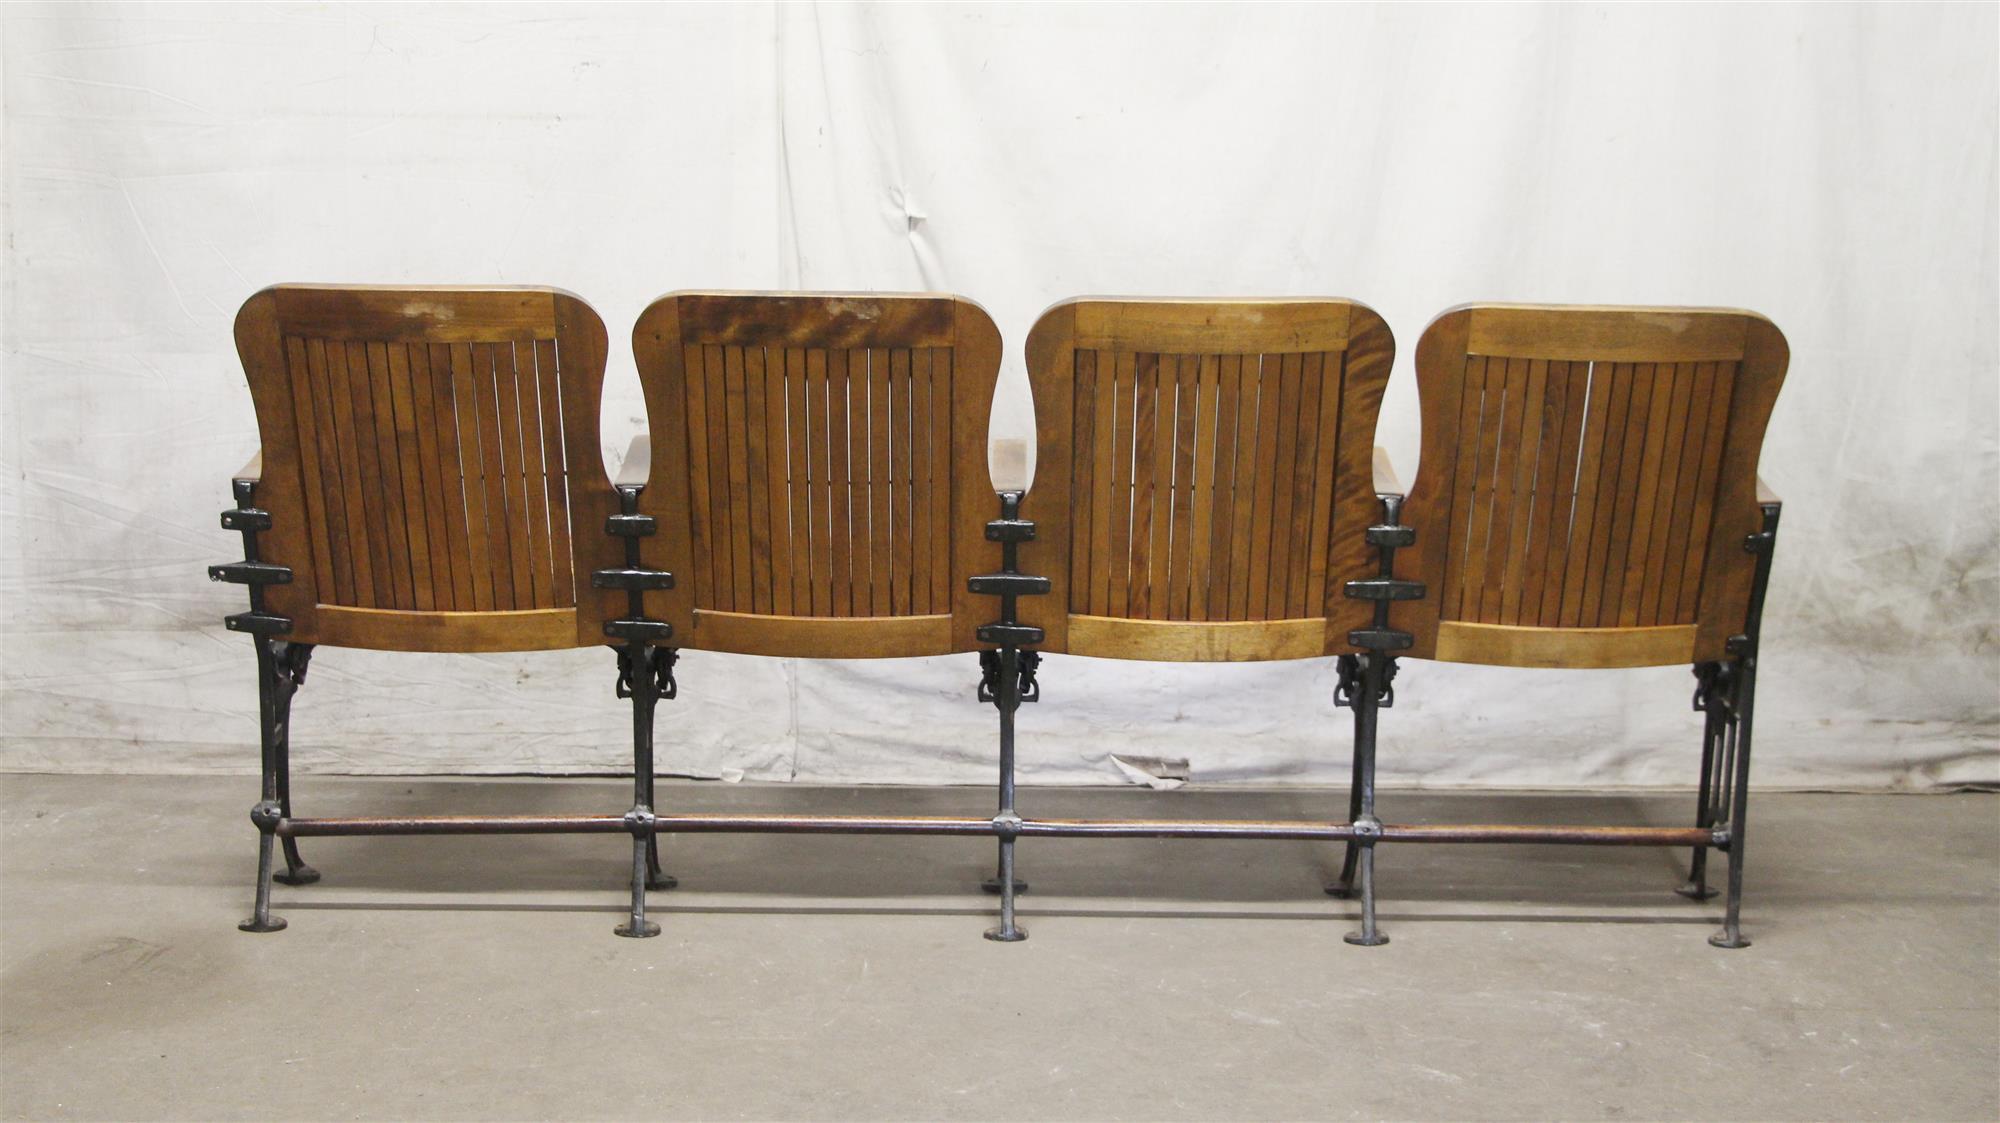 1905 Four Seat Folding Theater Chairs with Cast Iron Frame from Brooklyn 1